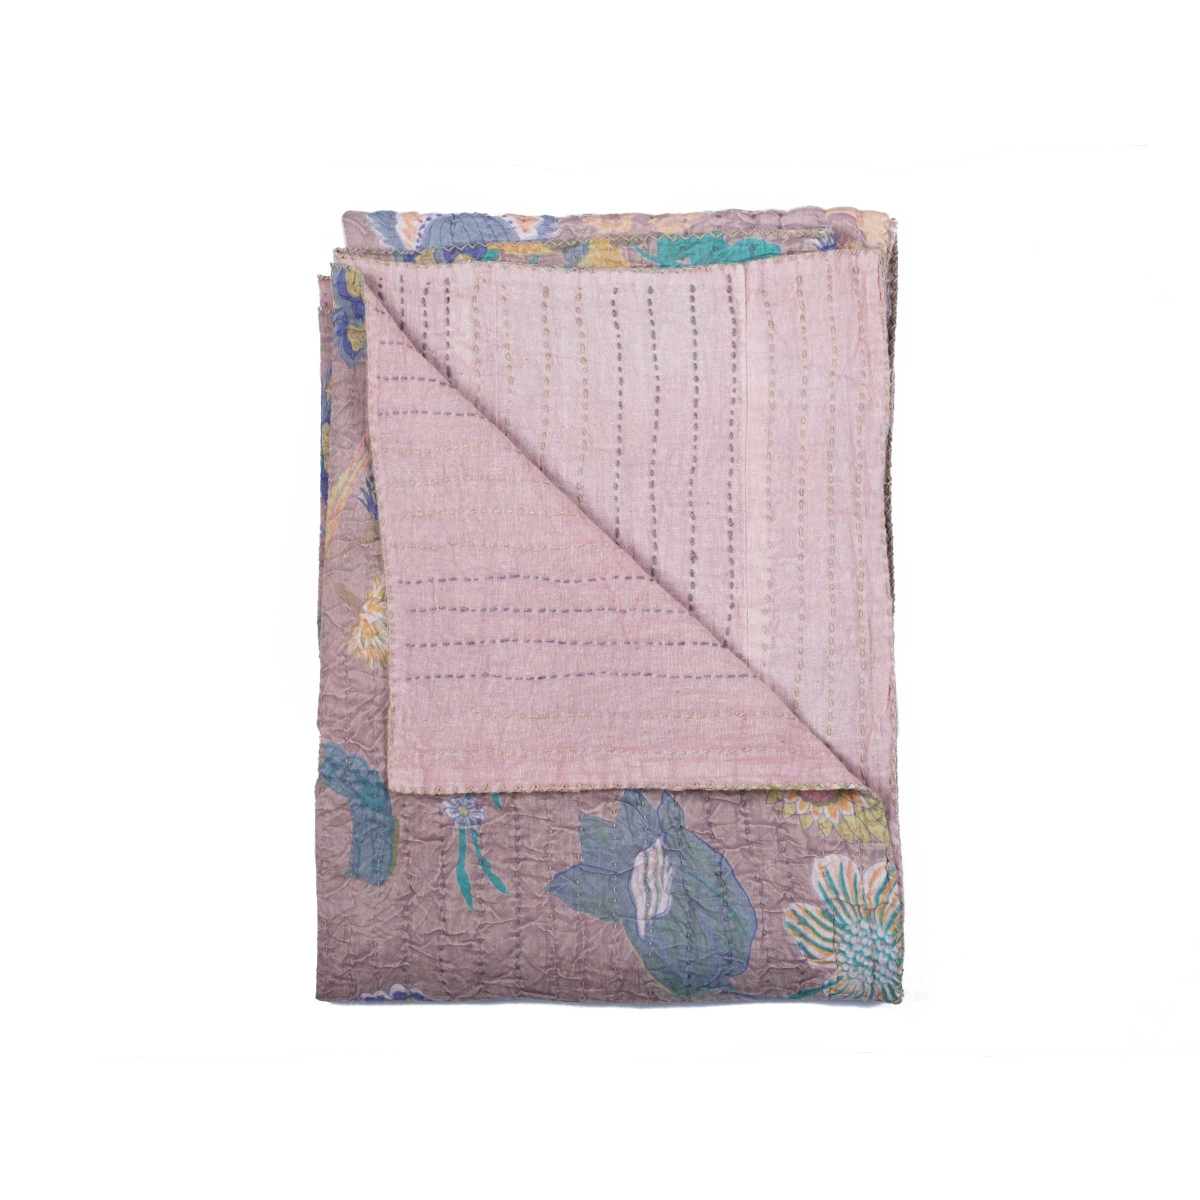 Home Roots Beddings 332345 Kantha Cotton Throw - 1117-no.28, Multicolor - 50 X 70 In.